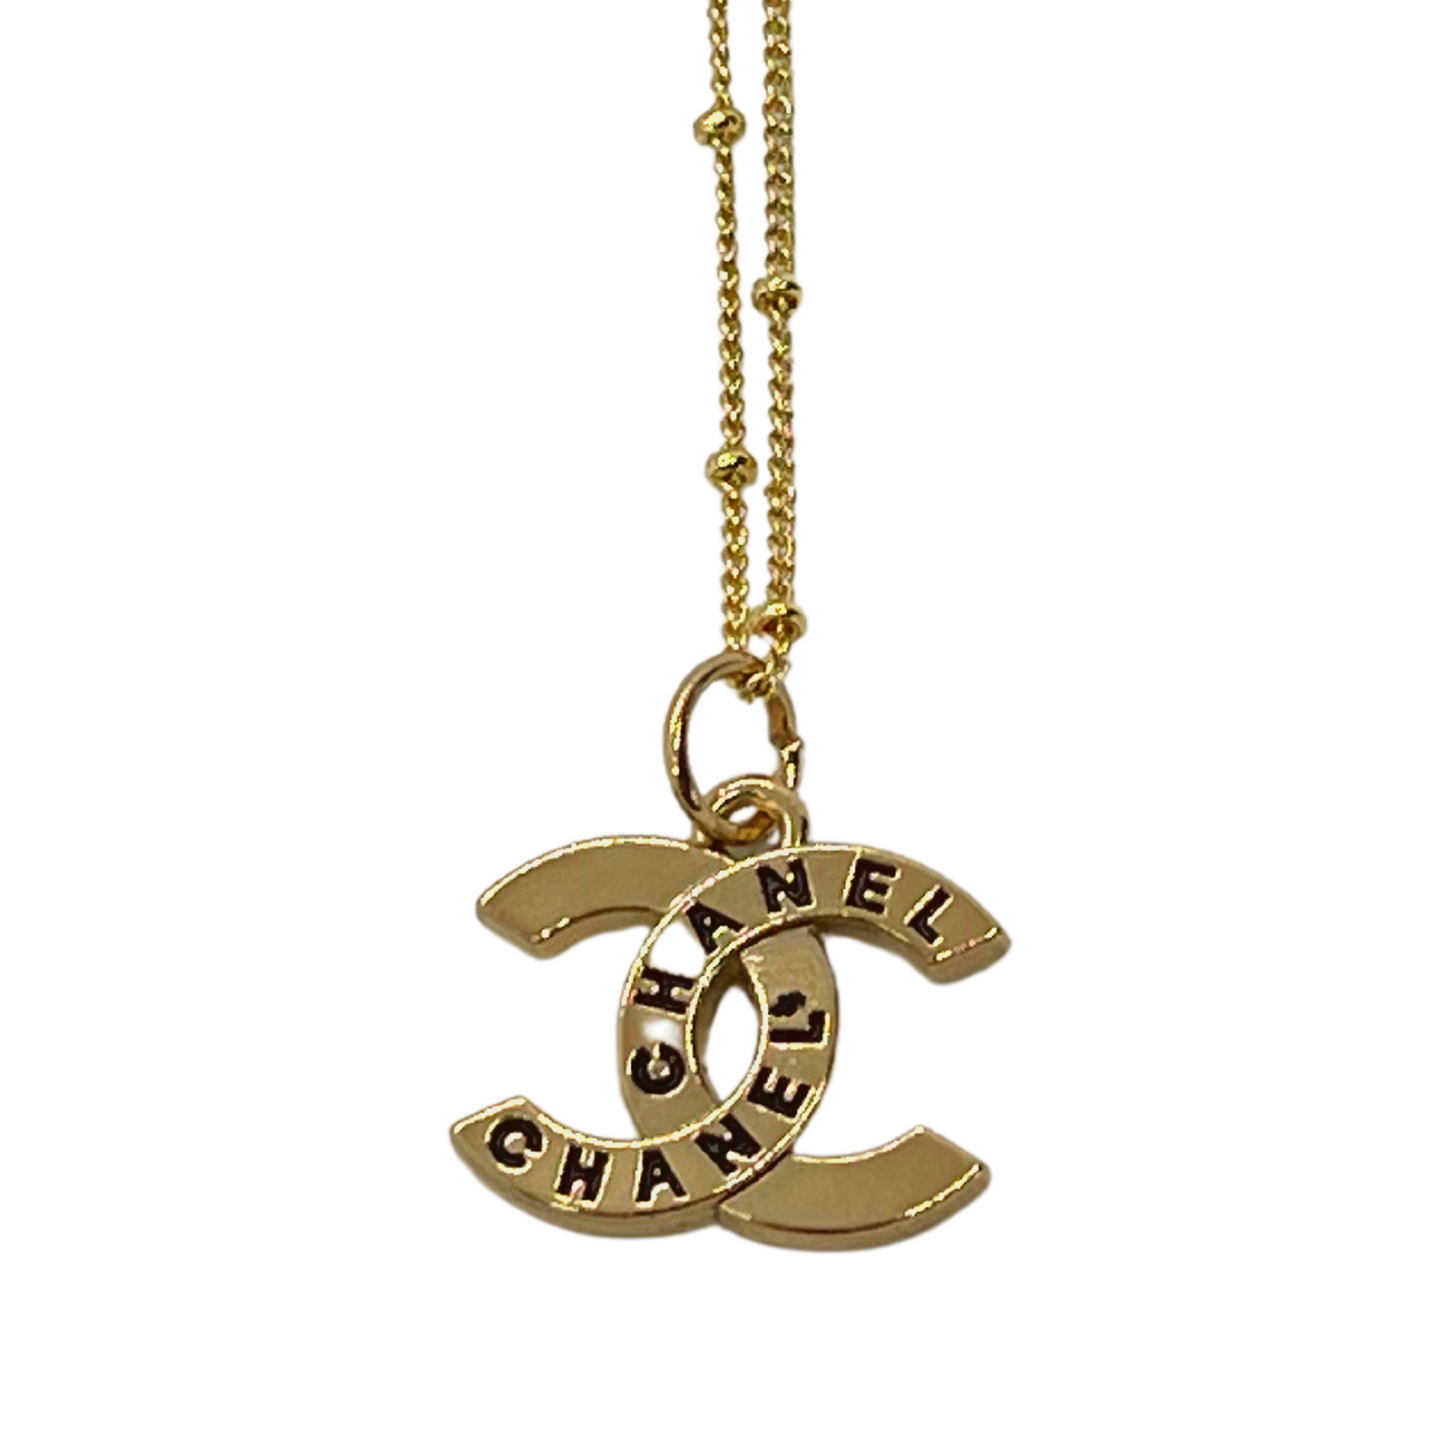 CHANEL, Jewelry, Authentic Chanel Necklace